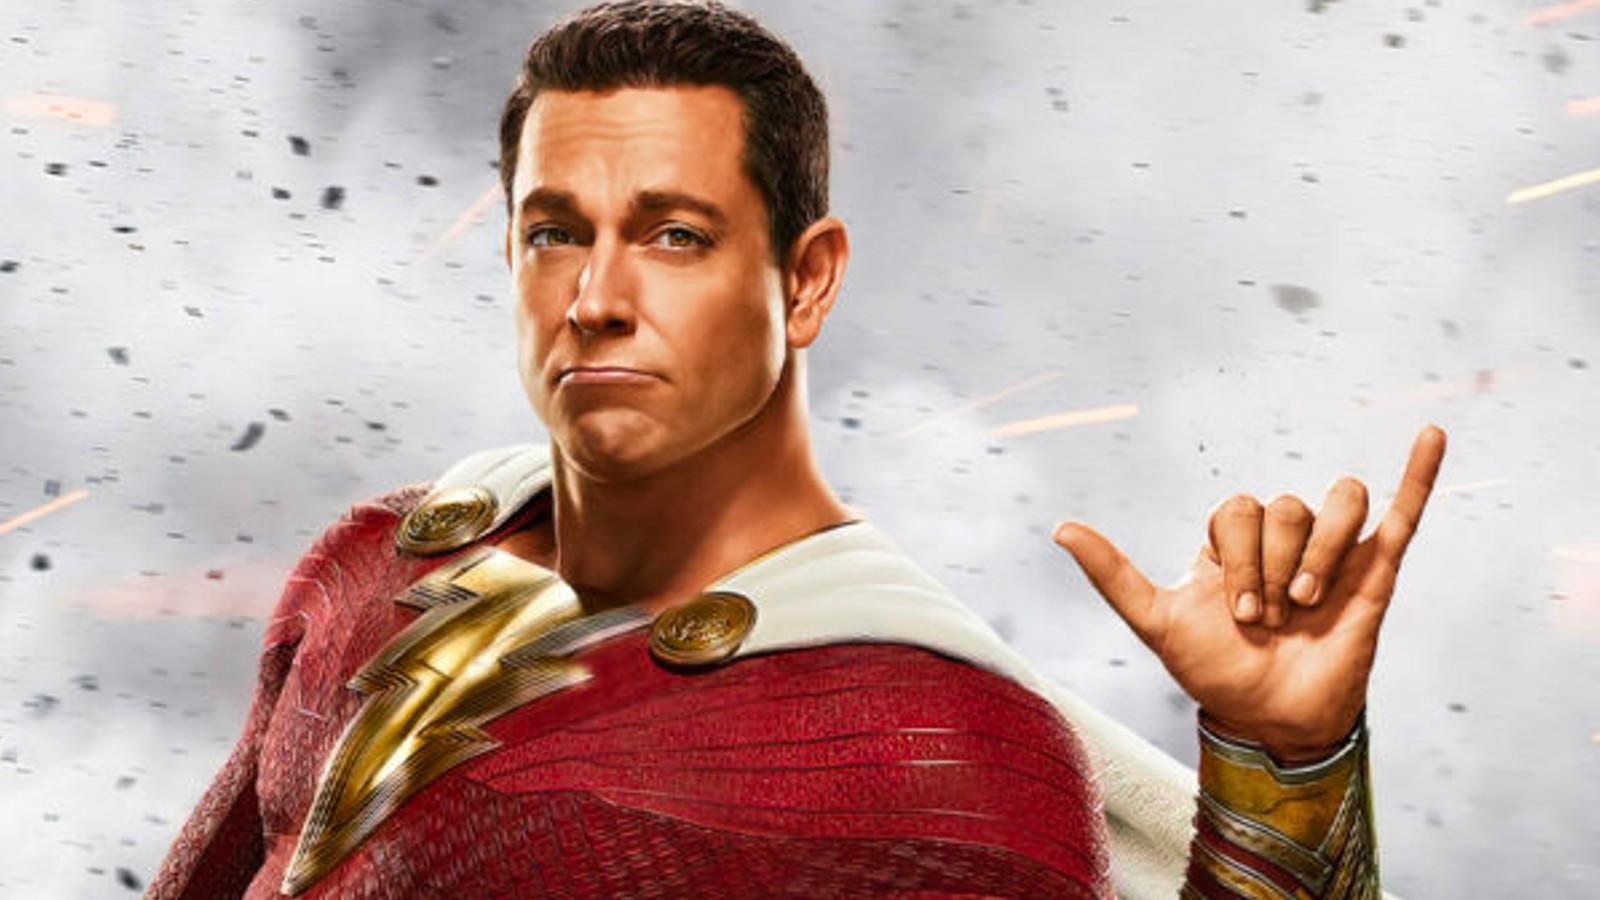 Shazam! Fury Of The Gods' director says he's done with superhero films  after bad reviews